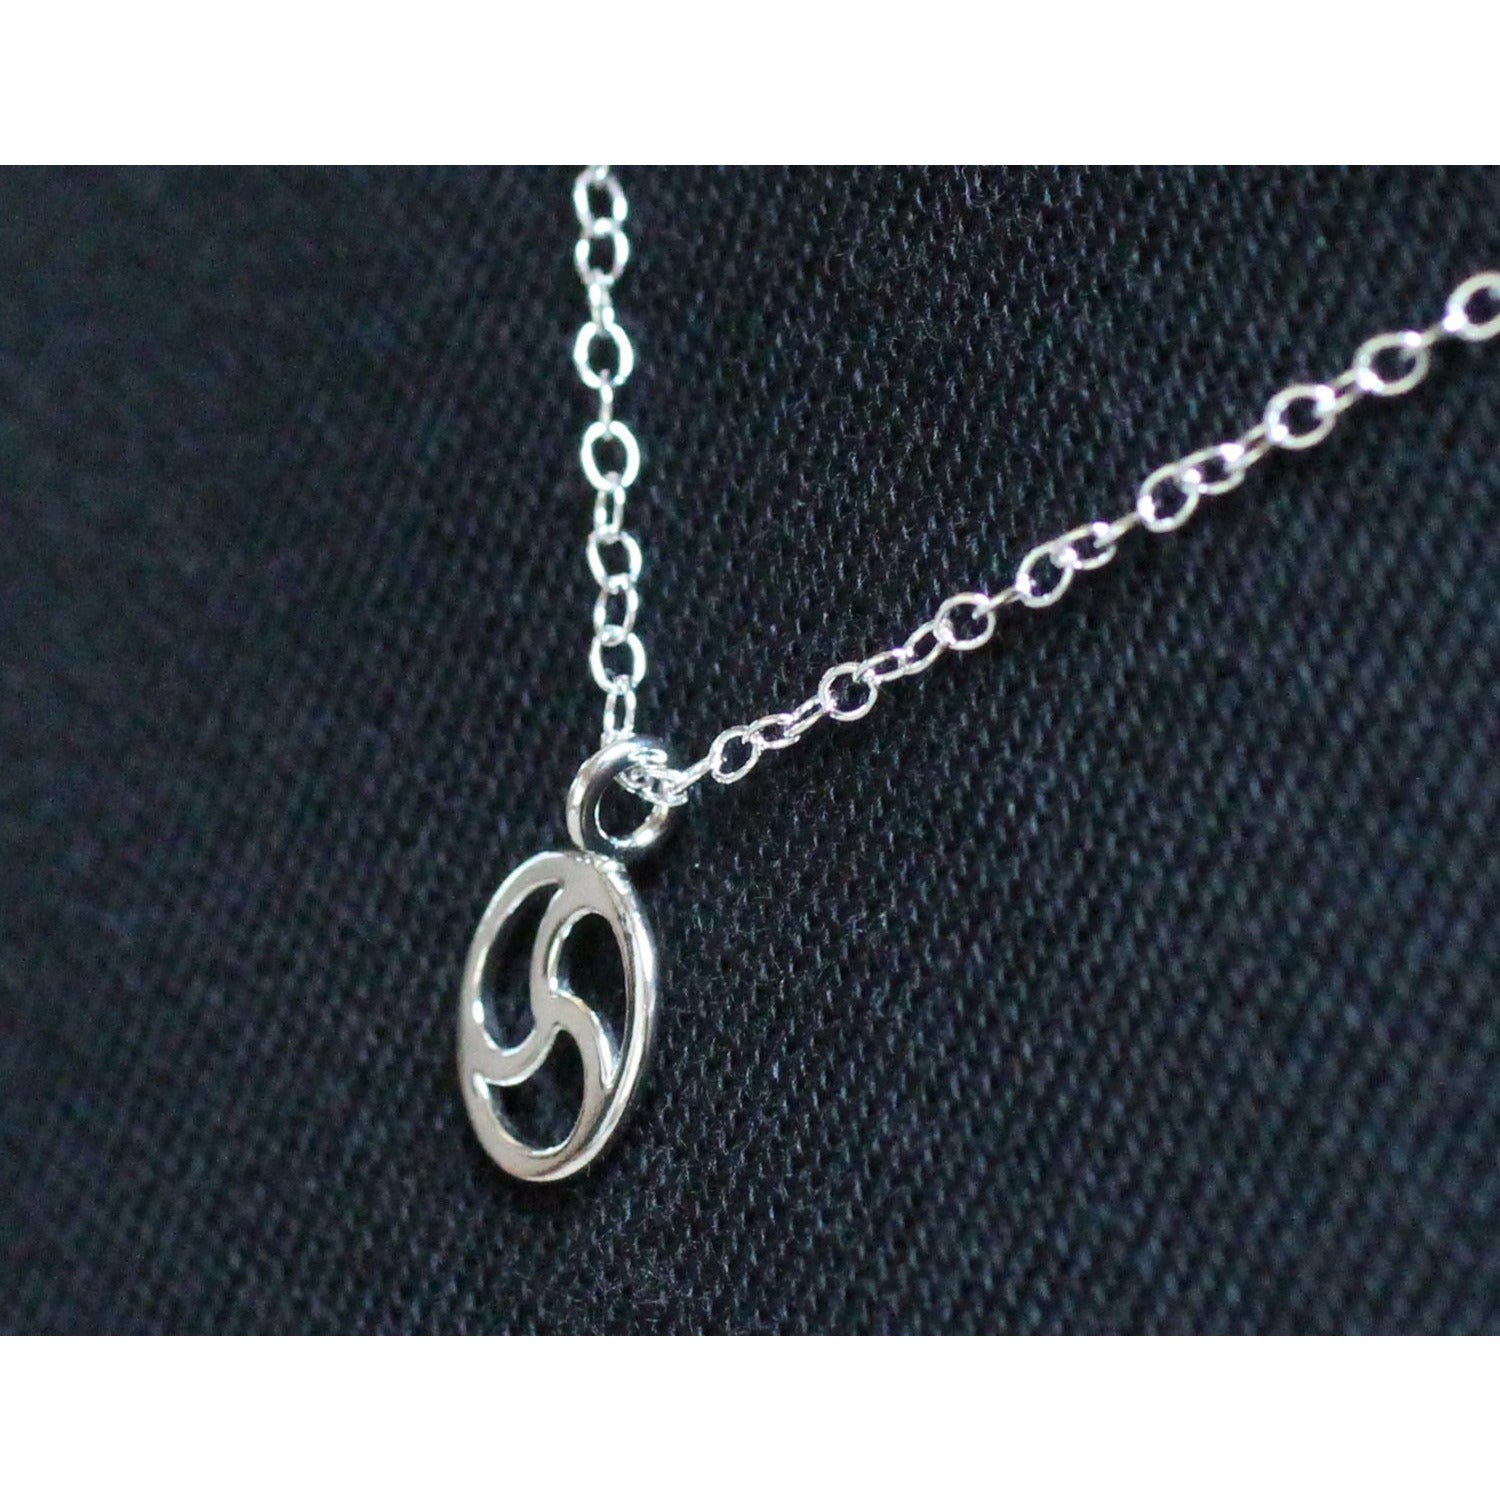 Sterling Silver Discreet cutaway BDSM Triskle, Day Collar, Discreet Petite Necklace Silver O Ring  - Unisex- Handmade